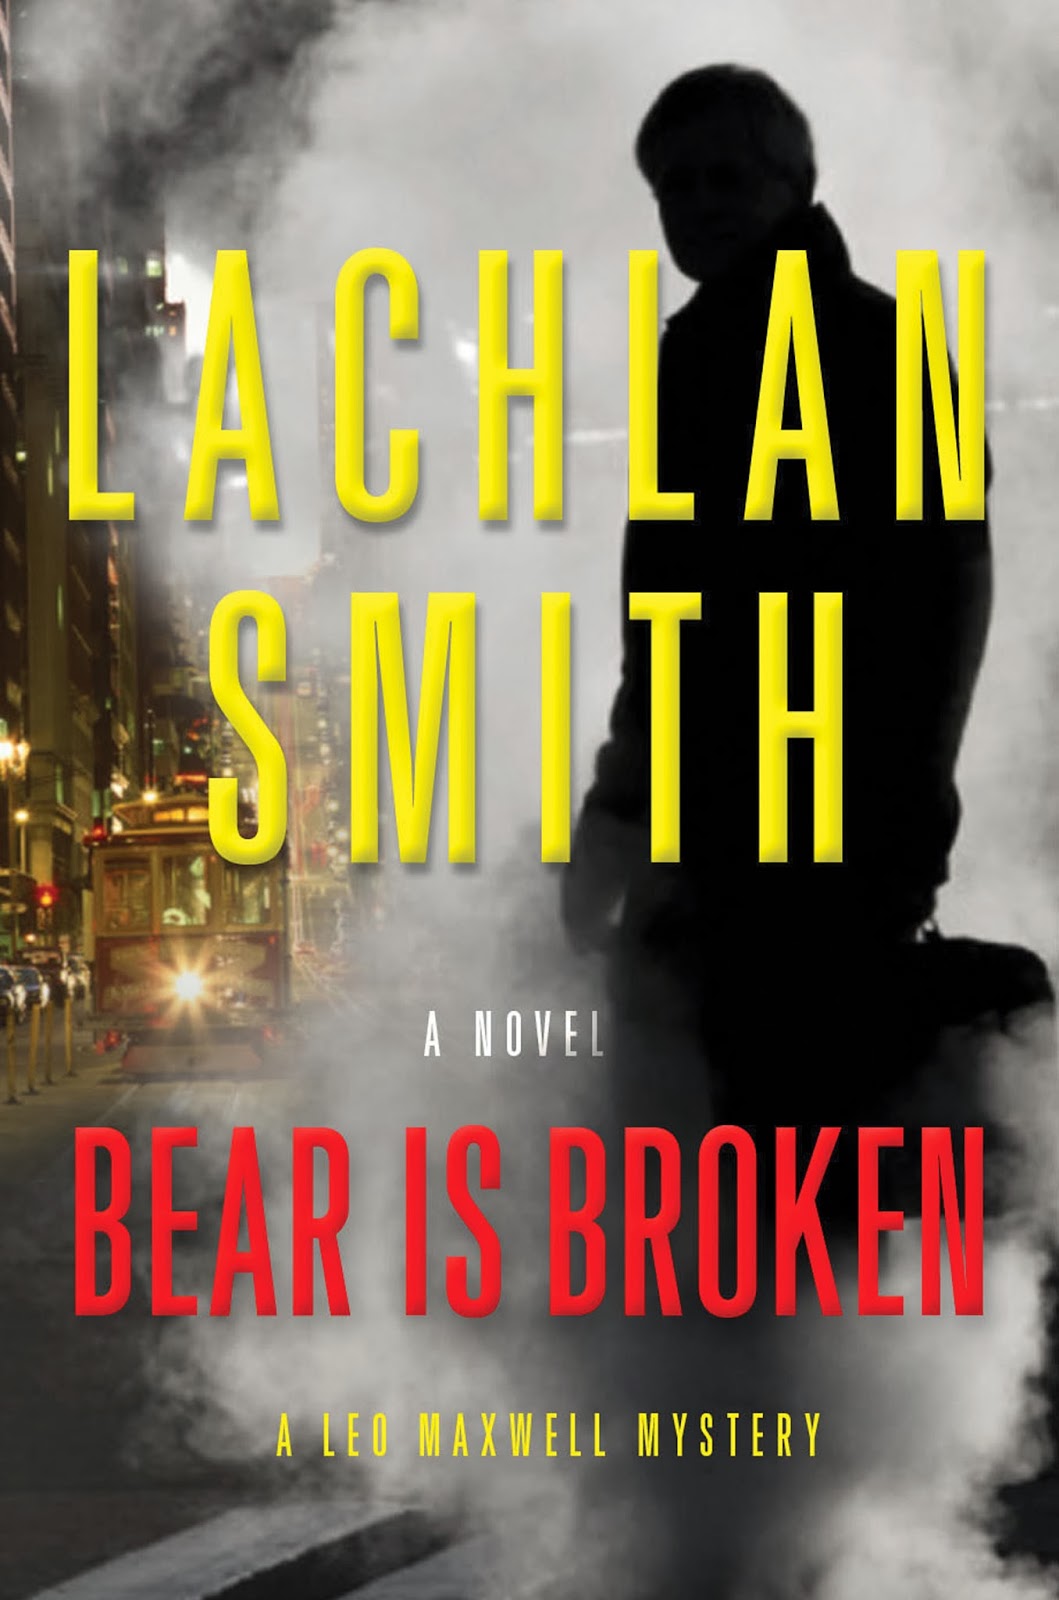 http://discover.halifaxpubliclibraries.ca/?q=title:%22bear%20is%20broken%22smith